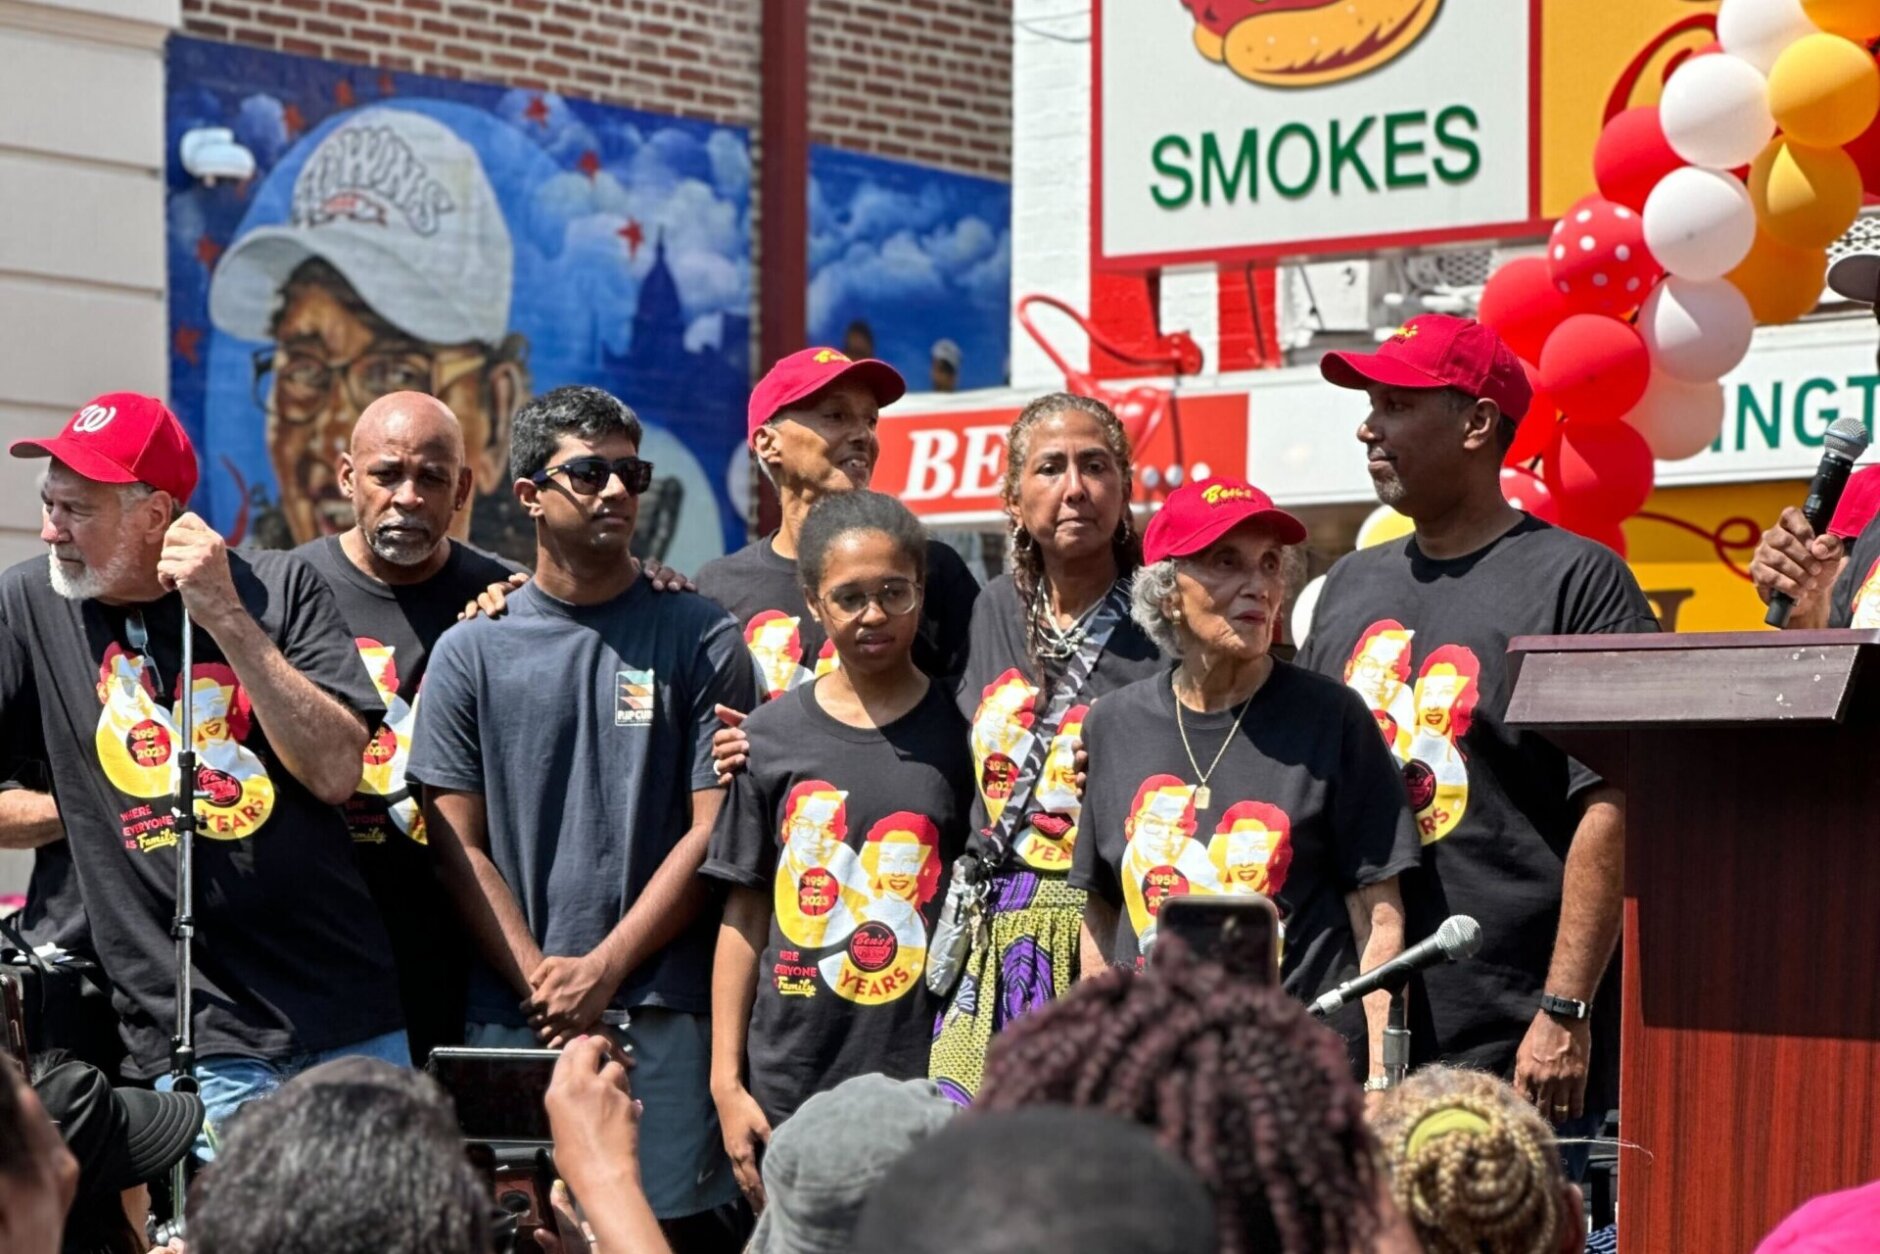 <p>Co-founder Virginia Ali, who many of Tuesday&#8217;s guest speakers called the &#8220;matriarch of homegrown business&#8221; in D.C., said she has nothing but gratitude for the community.</p>
